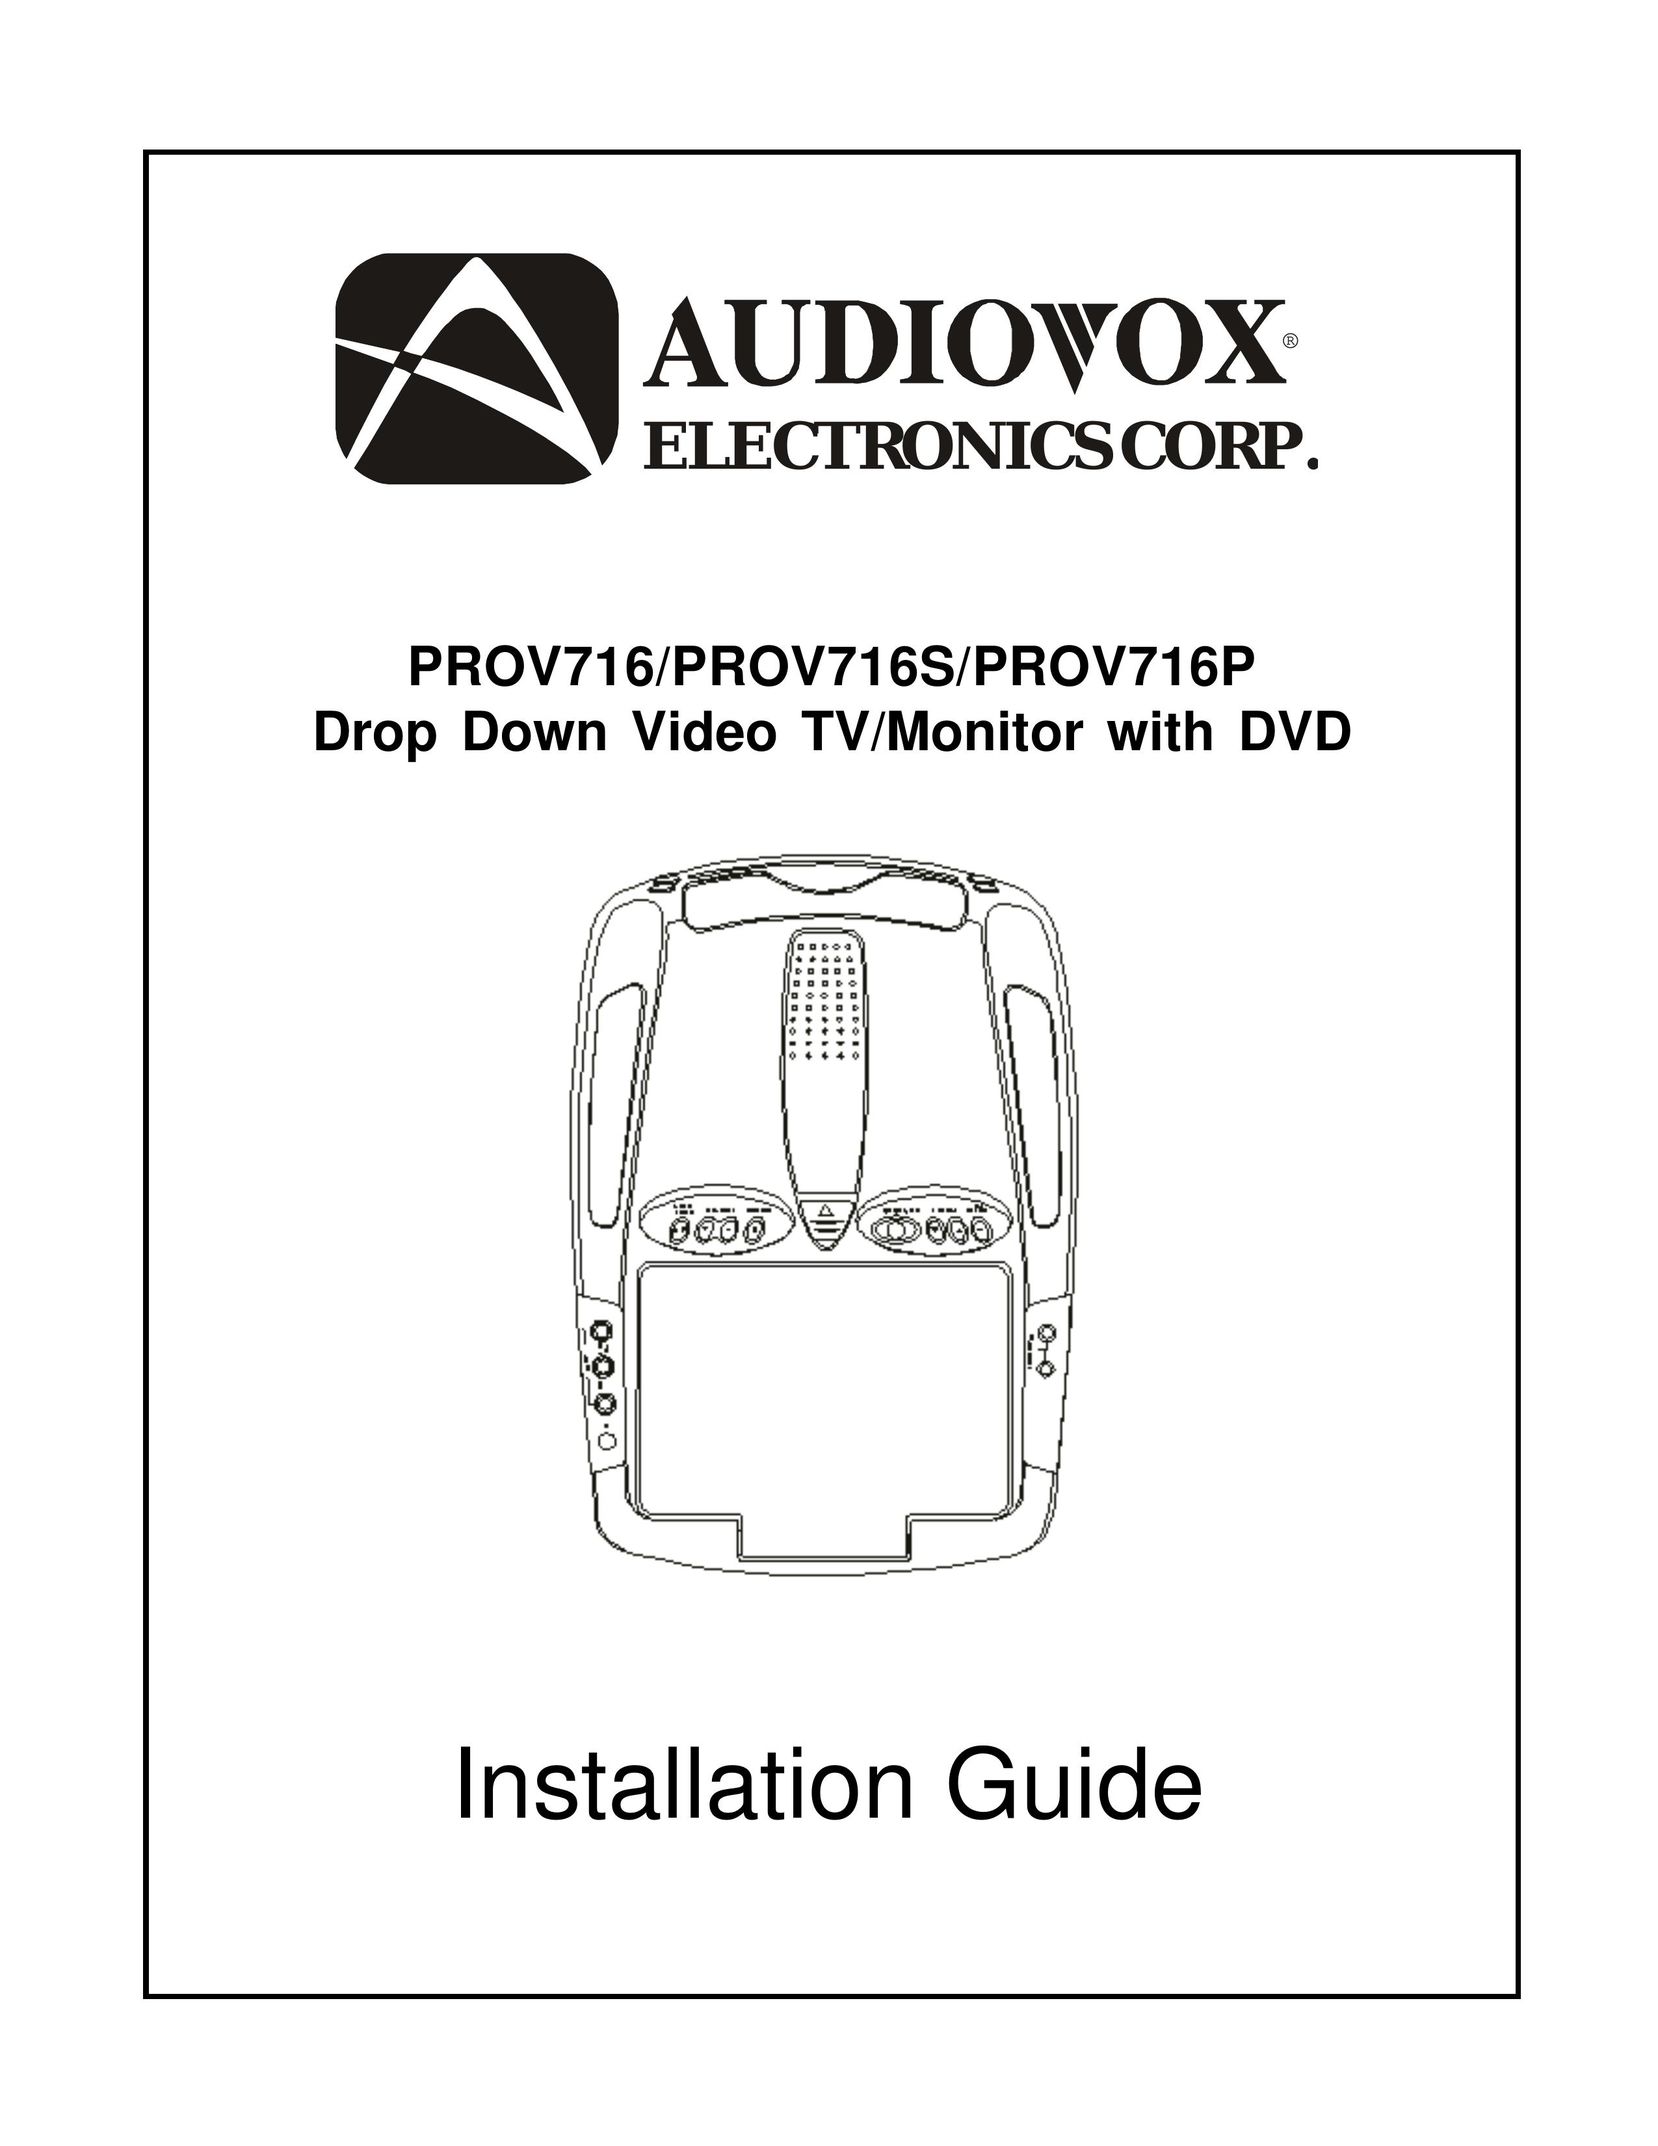 Audiovox Drop Down Video TV/Monitor with DVD Car Video System User Manual